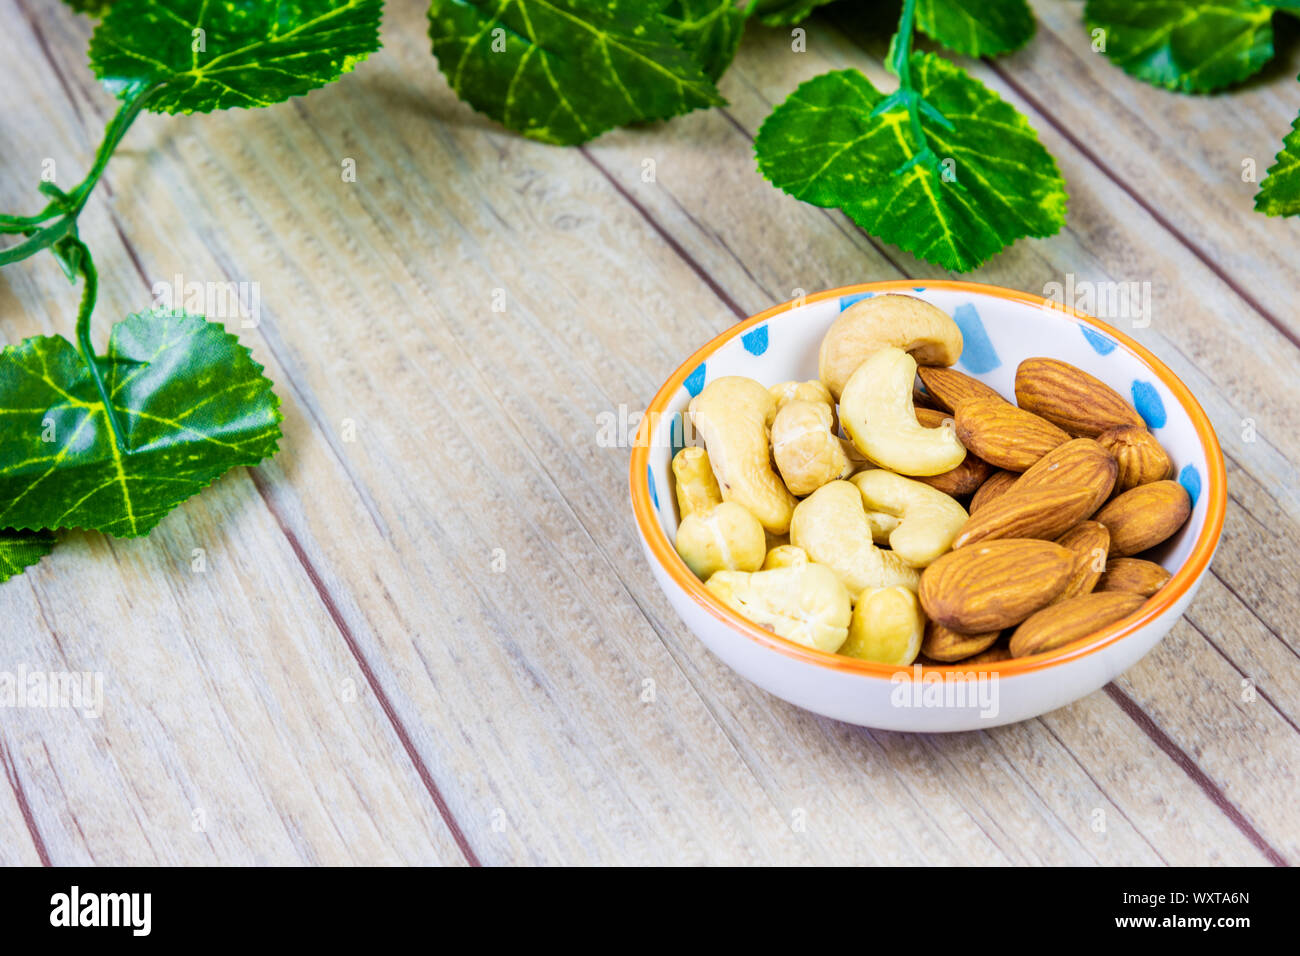 Almonds and Cashews in a Bowl on a Wooden Background Stock Photo